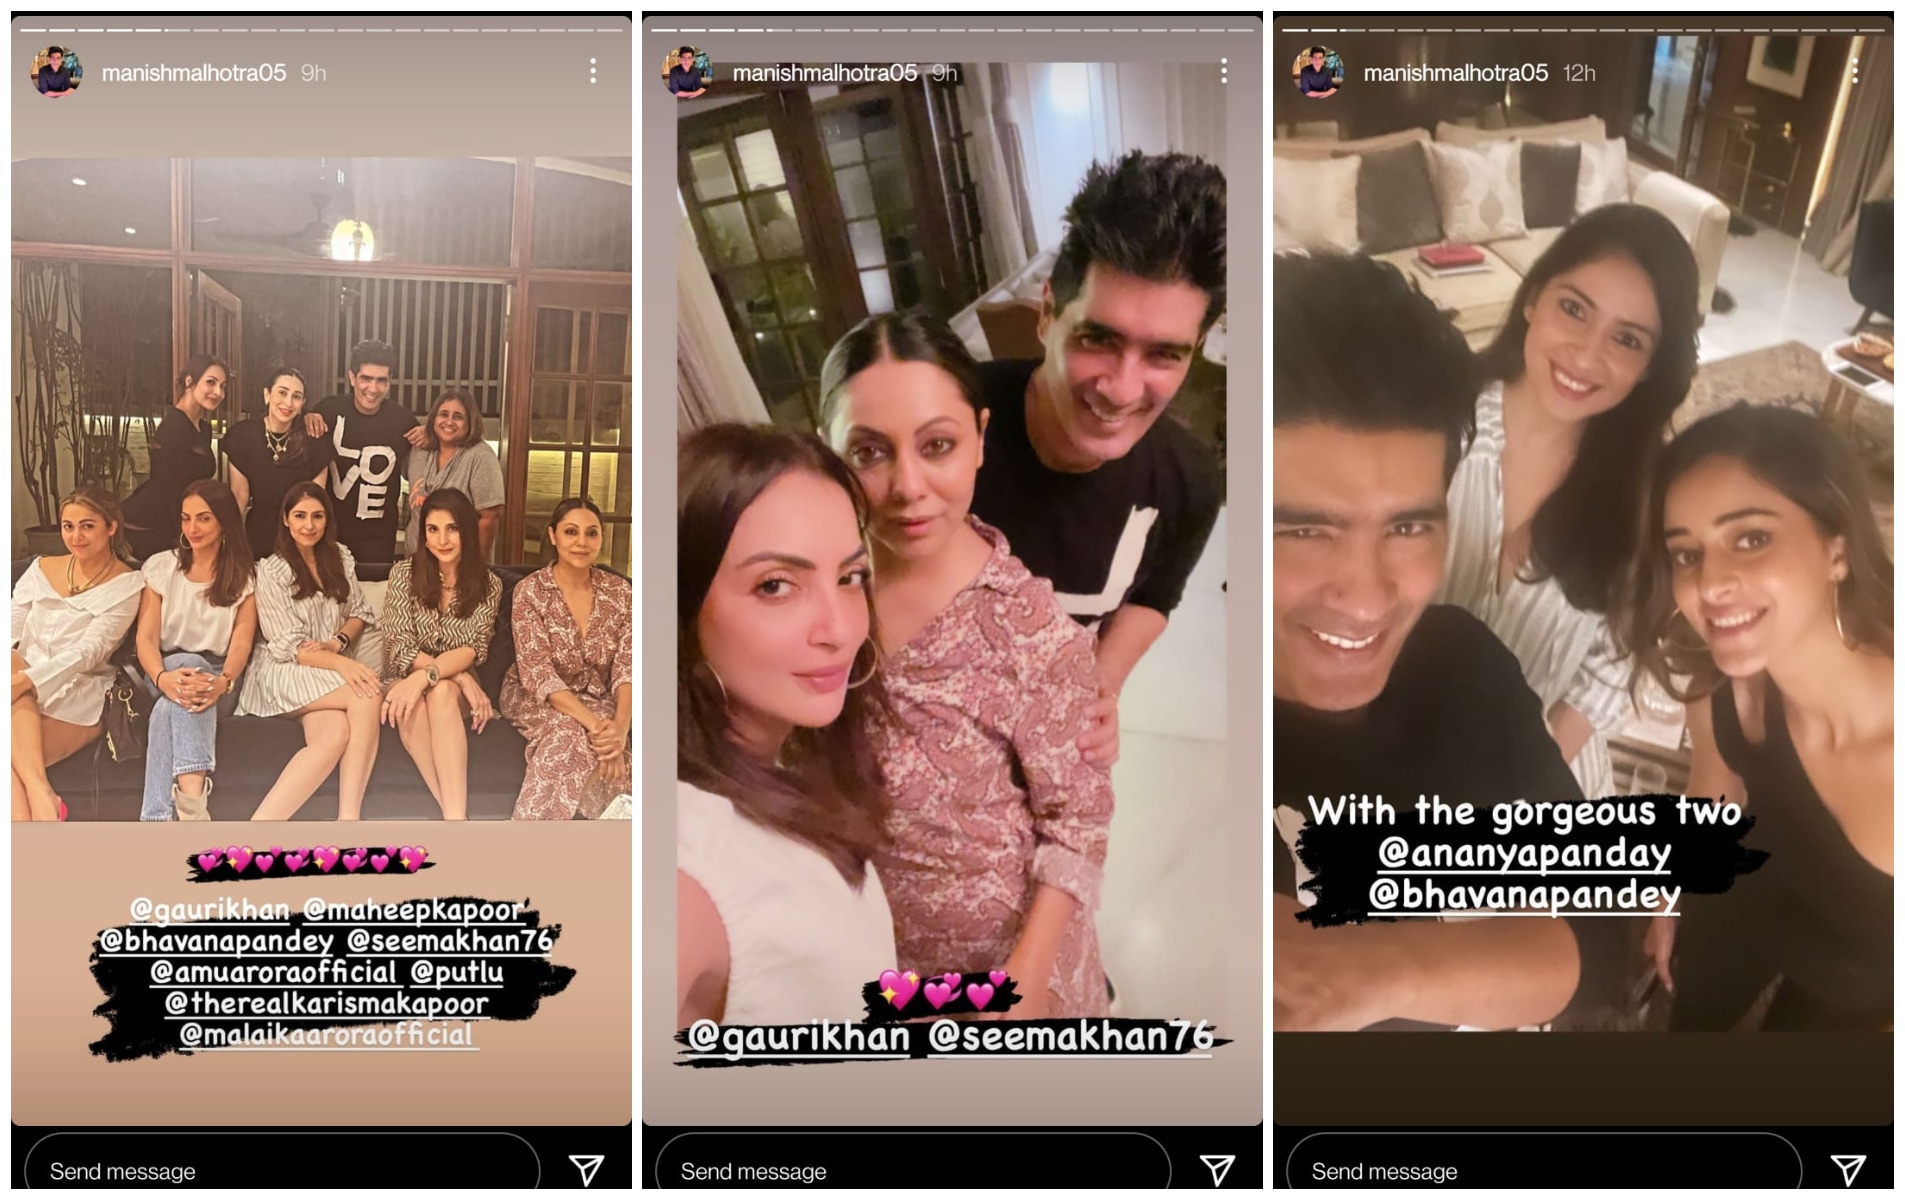 Manish Malhotra took to Instagram to share pictures from the gathering.